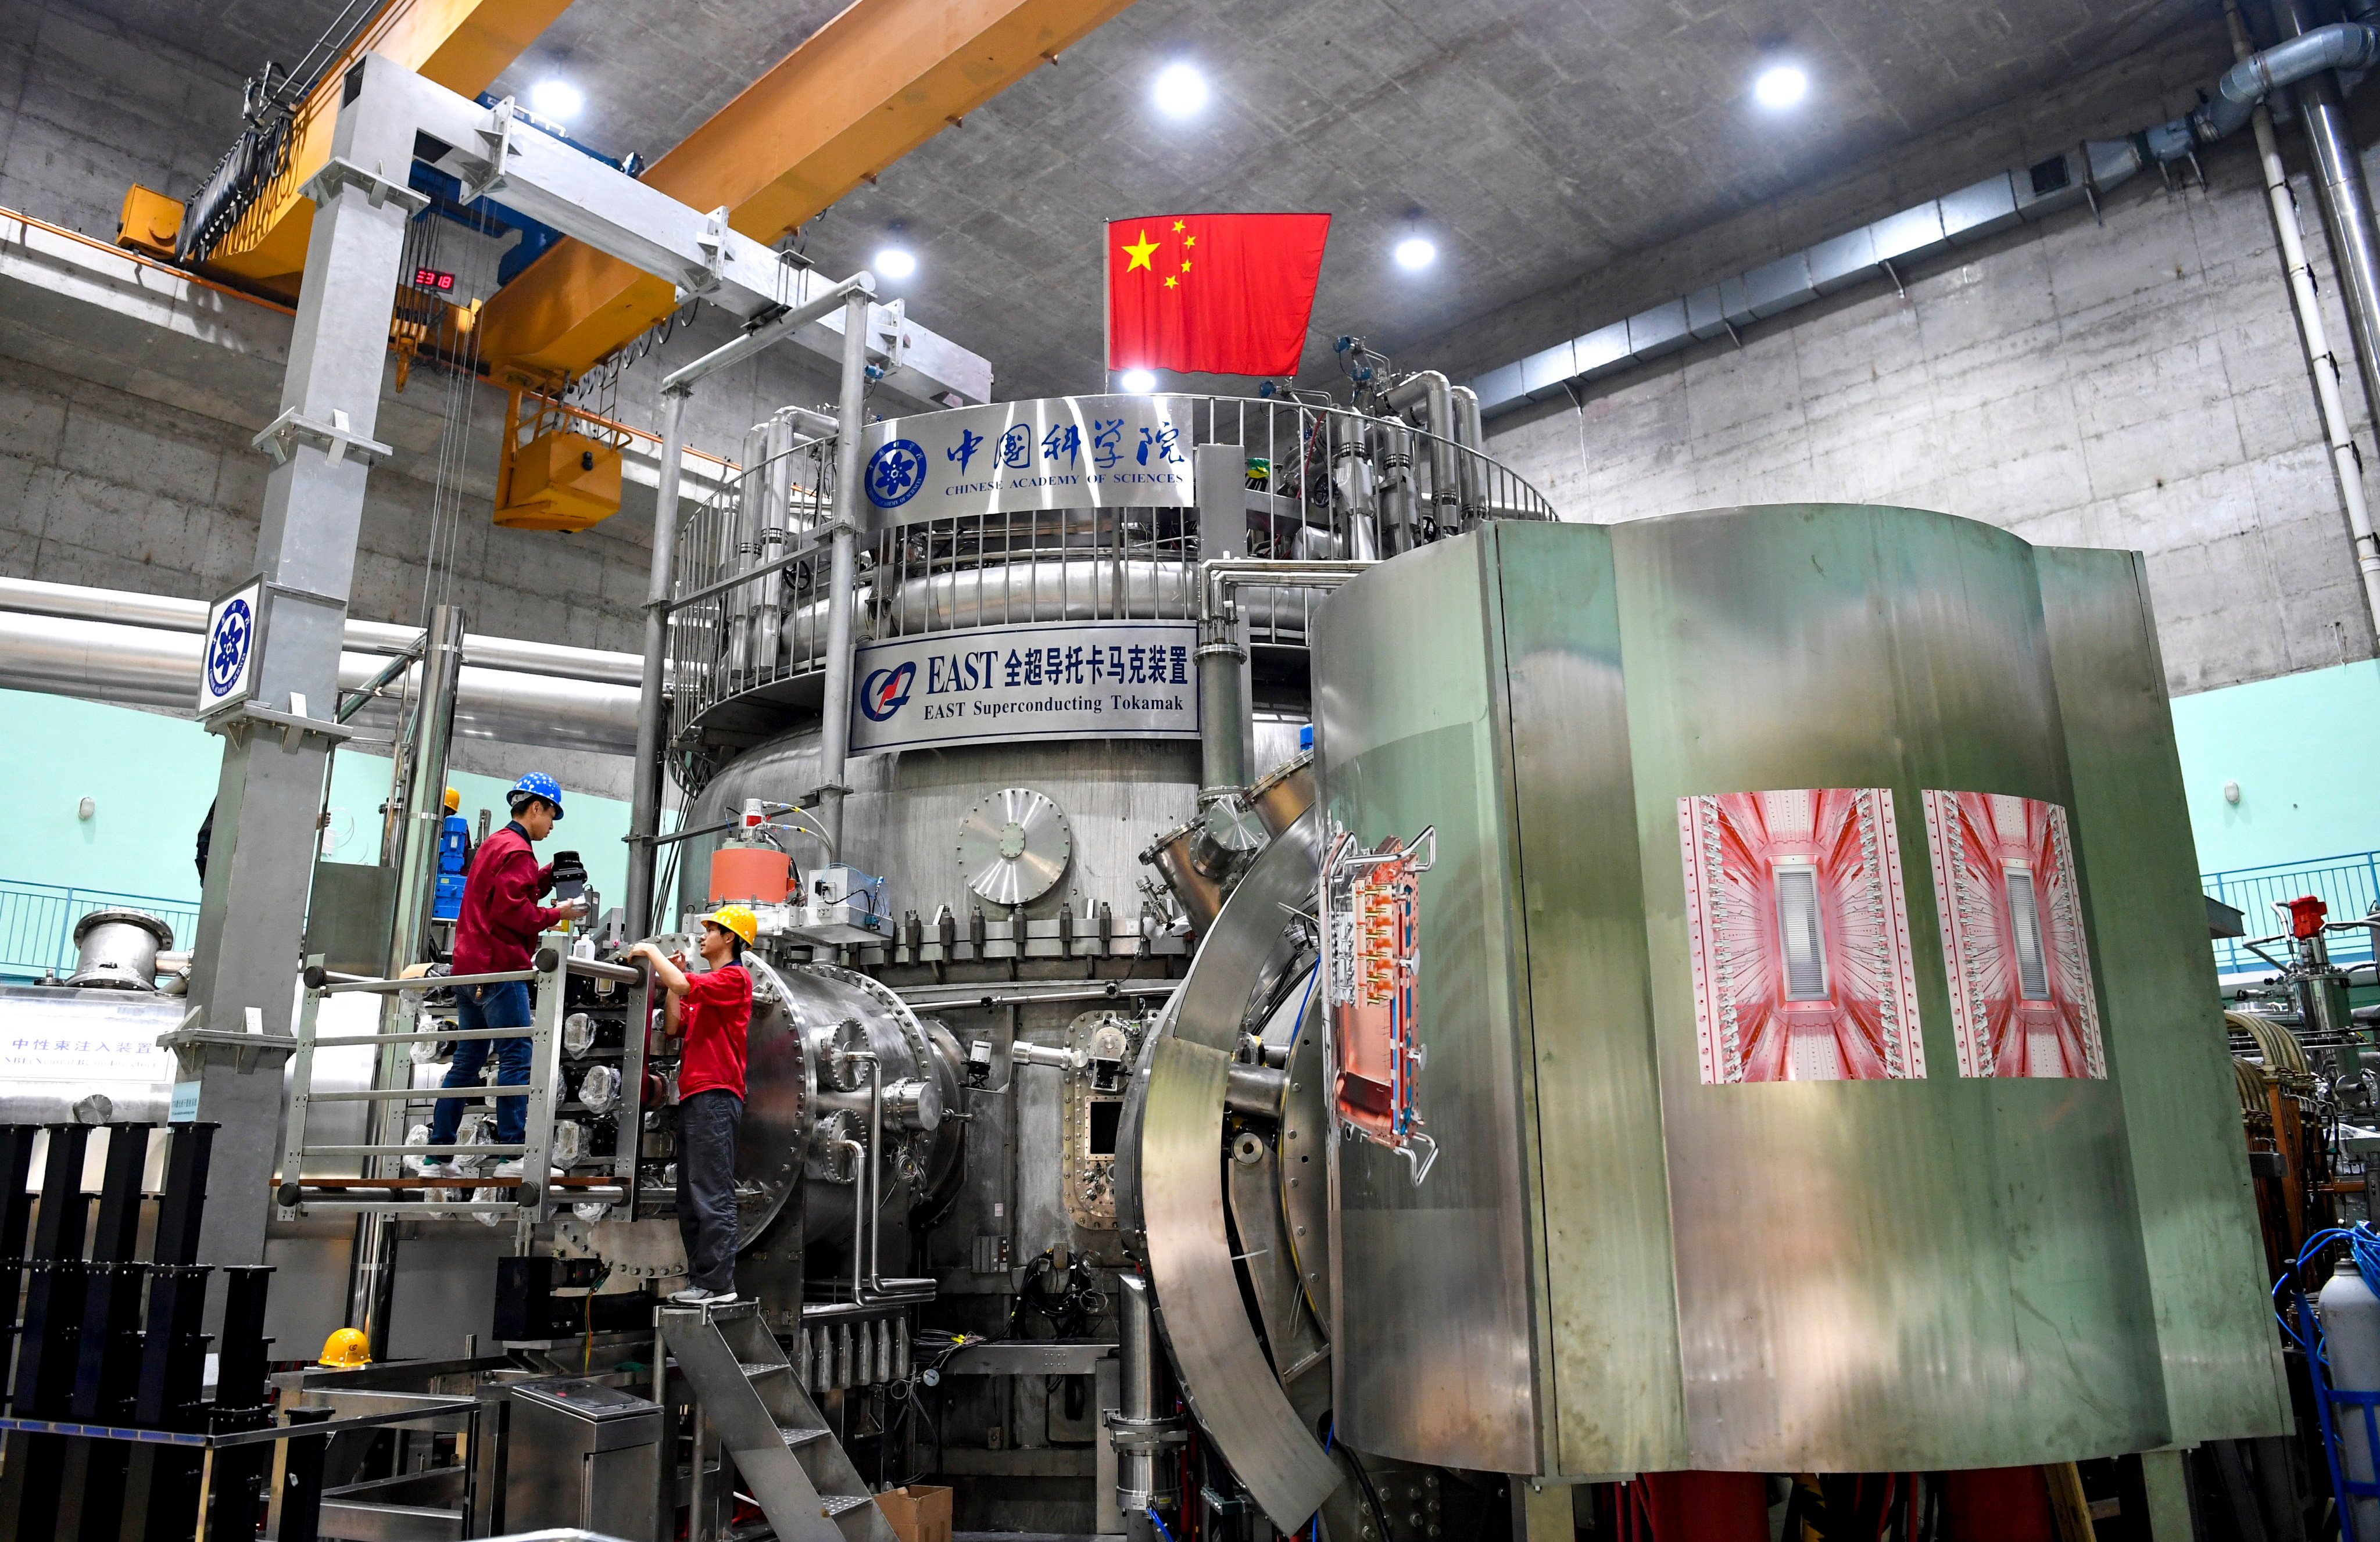 A scientific breakthrough in using tokamak reactors, like the Experimental Advanced Superconducting Tokamak (EAST) in Hefei, China, pictured, has brought researchers a step closer to seeing nuclear fusion become commercially viable. Photo: Xinhua